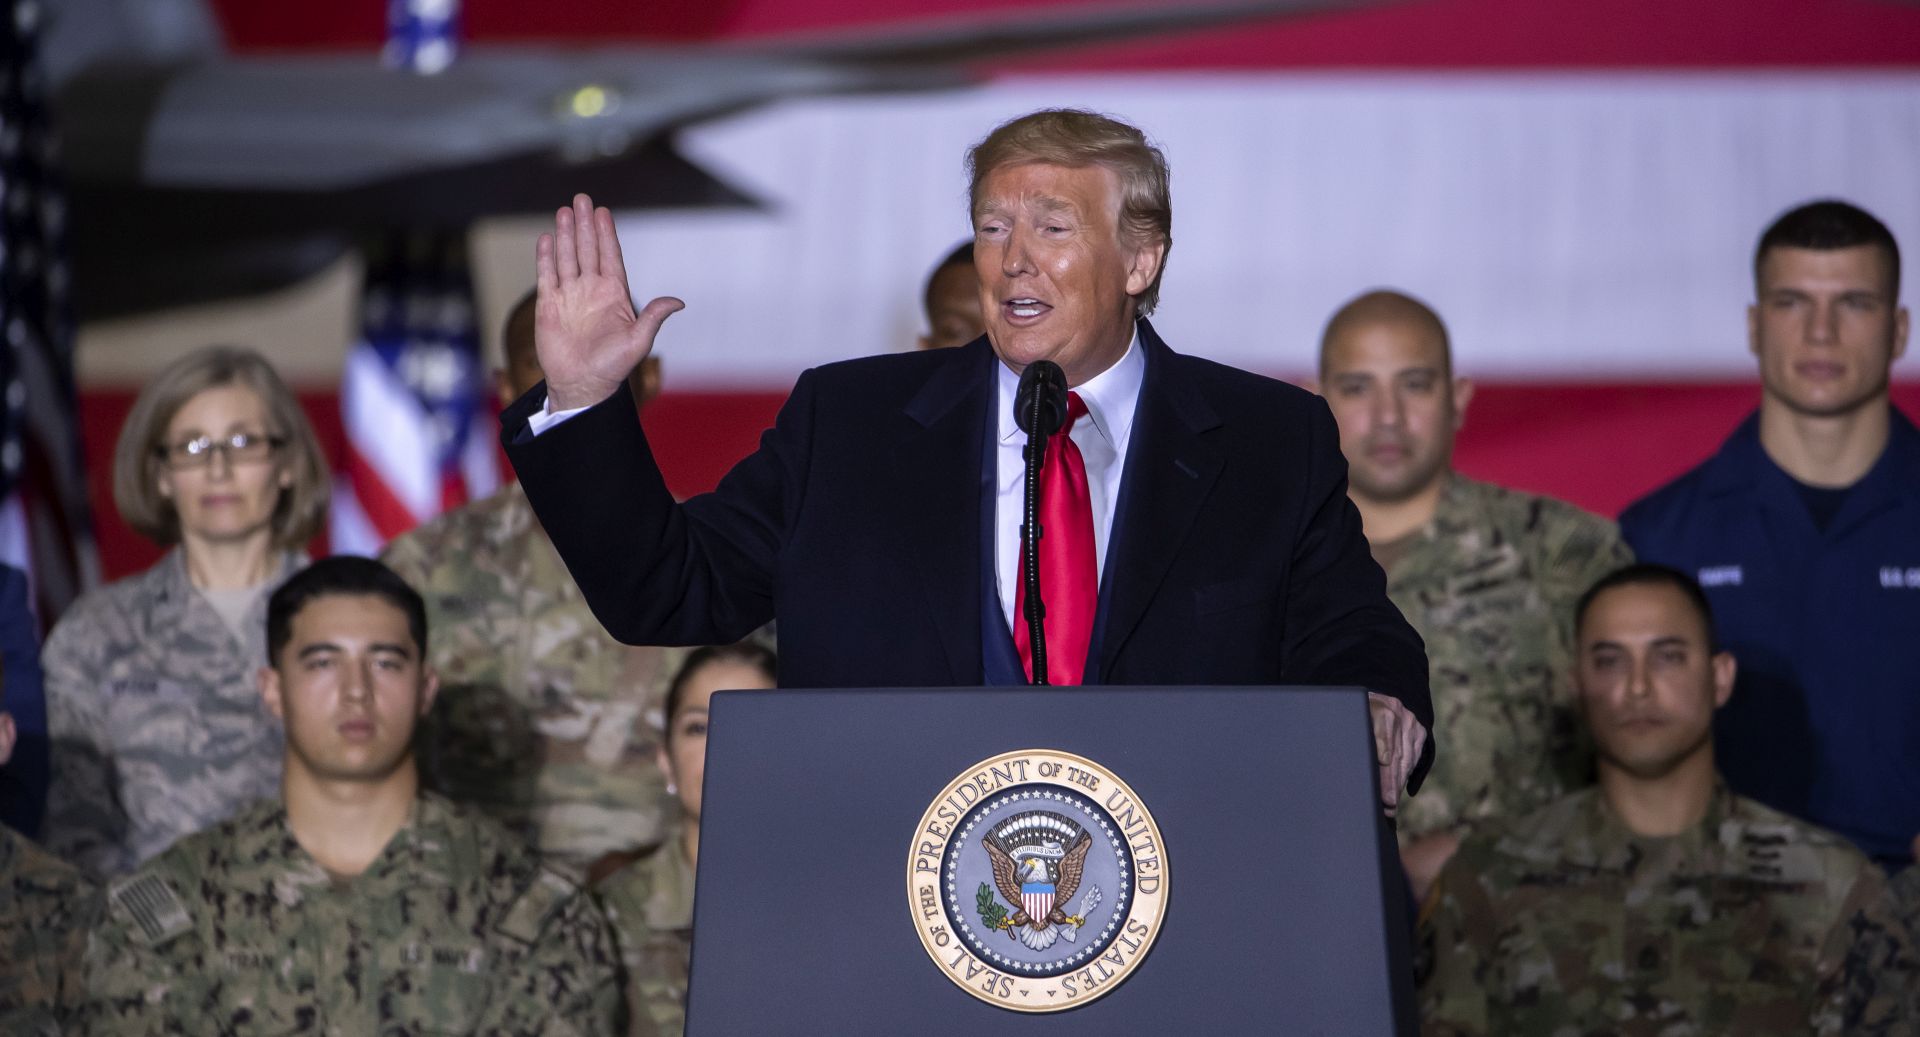 epa08084324 US President Donald J. Trump (C) speaks on stage during the signing ceremony for the National Defense Authorization Act for Fiscal Year 2020 inside Hangar Six at Joint Base Andrews in Suitland, Maryland, USA, 20 December 2019. The 738 billion US dollar military funding bill includes the creation of the Space Force.  EPA/ERIK S. LESSER